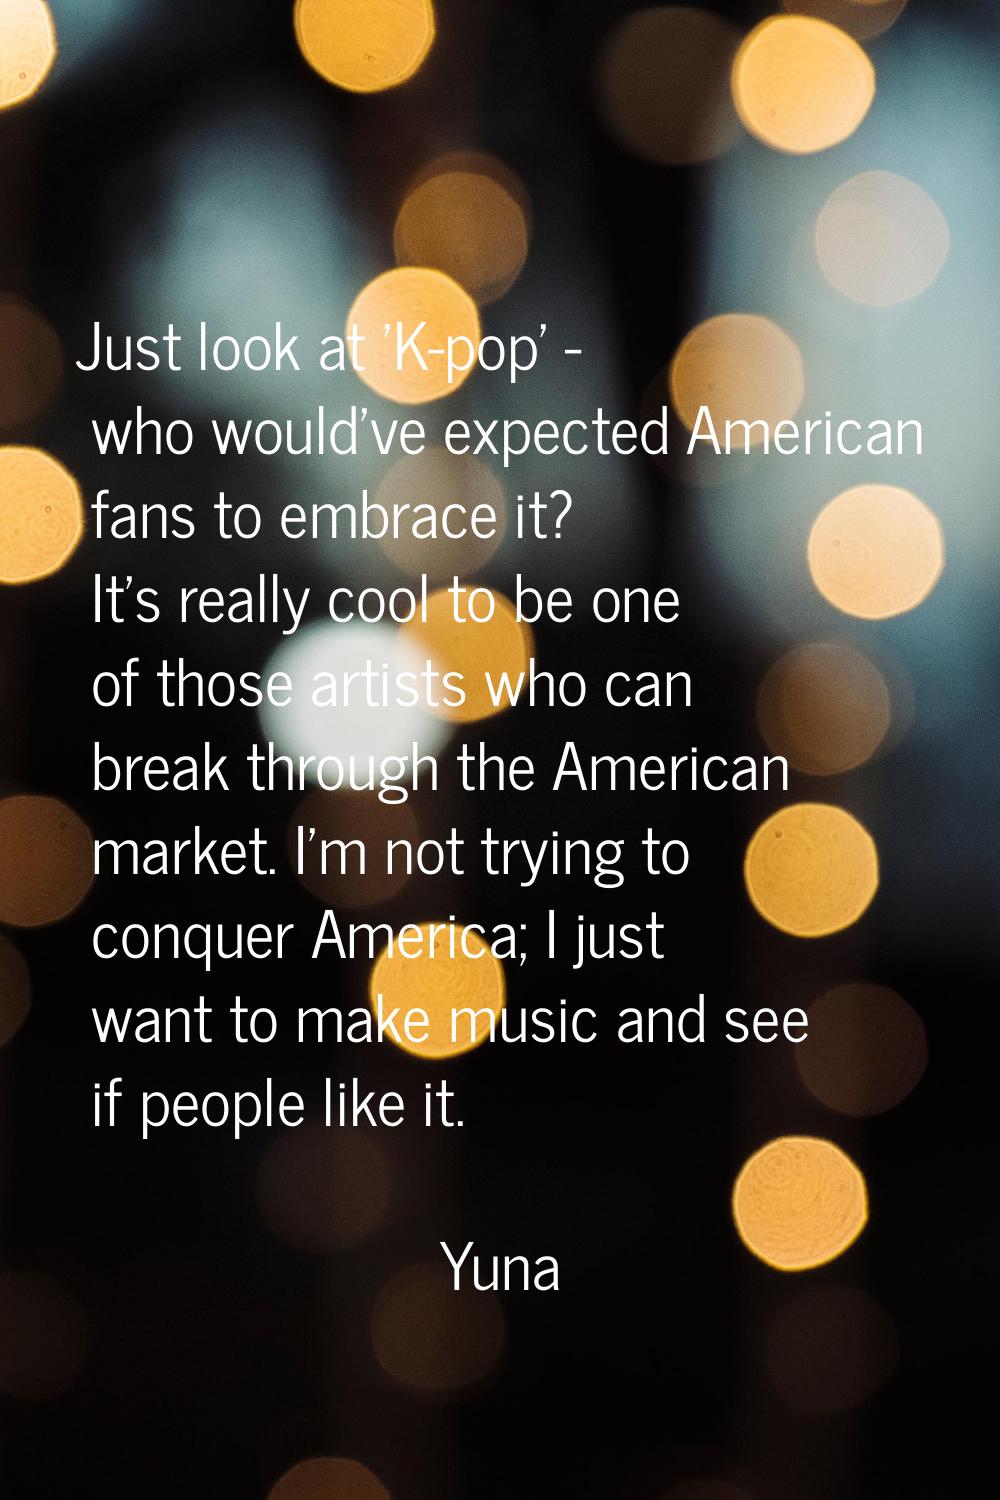 Just look at 'K-pop' - who would've expected American fans to embrace it? It's really cool to be on